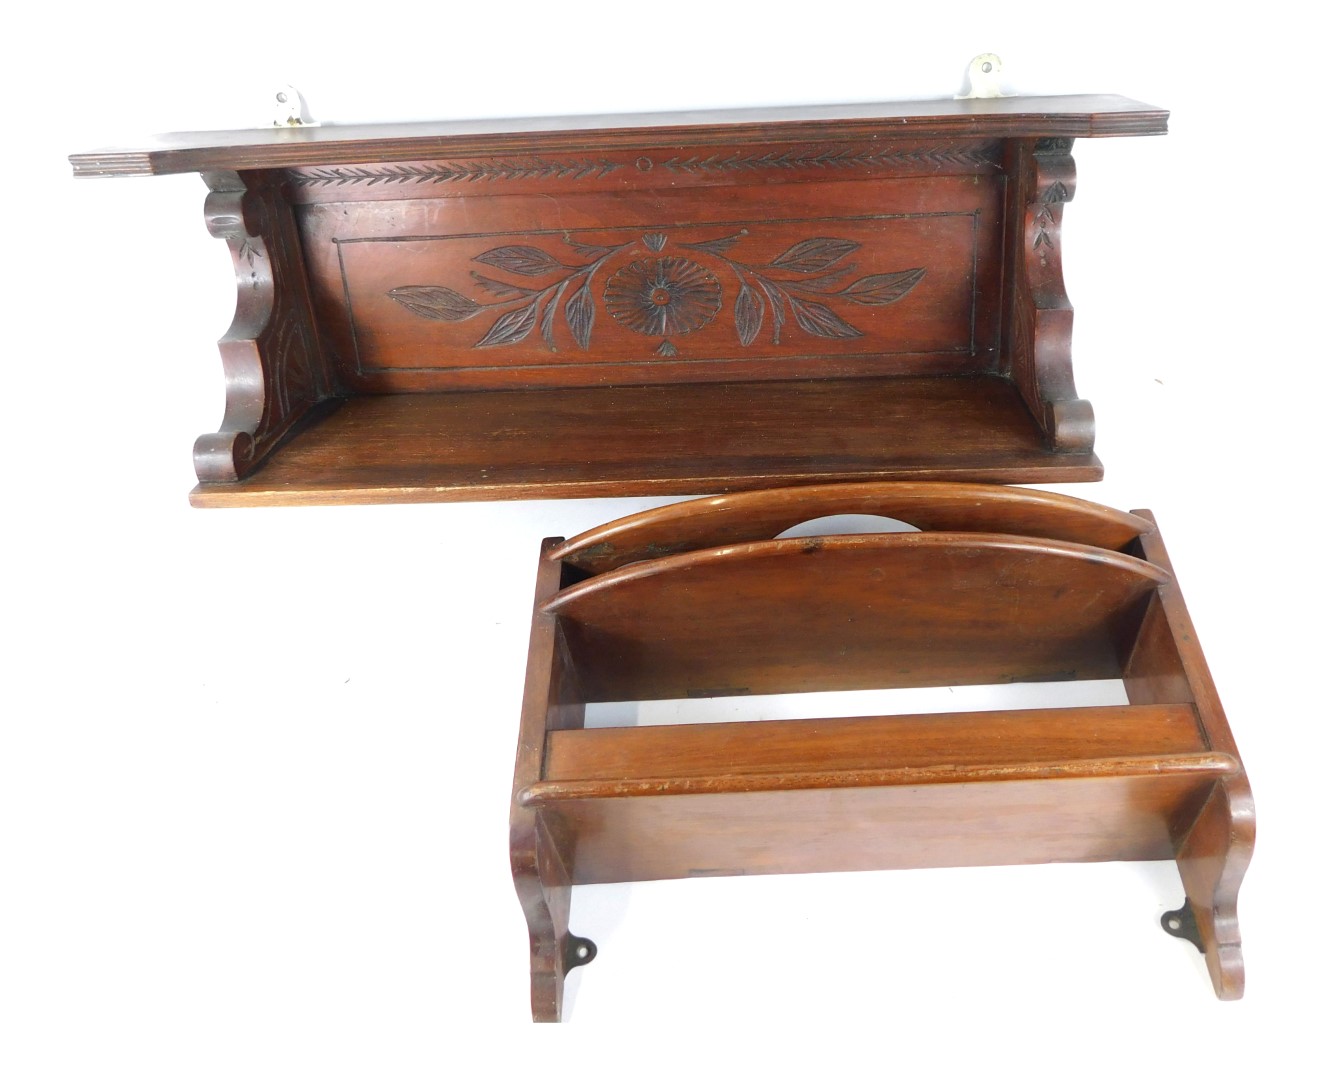 An early 20thC mahogany wall shelf, with three bottle recesses above a shelf, 28.5cm high, together